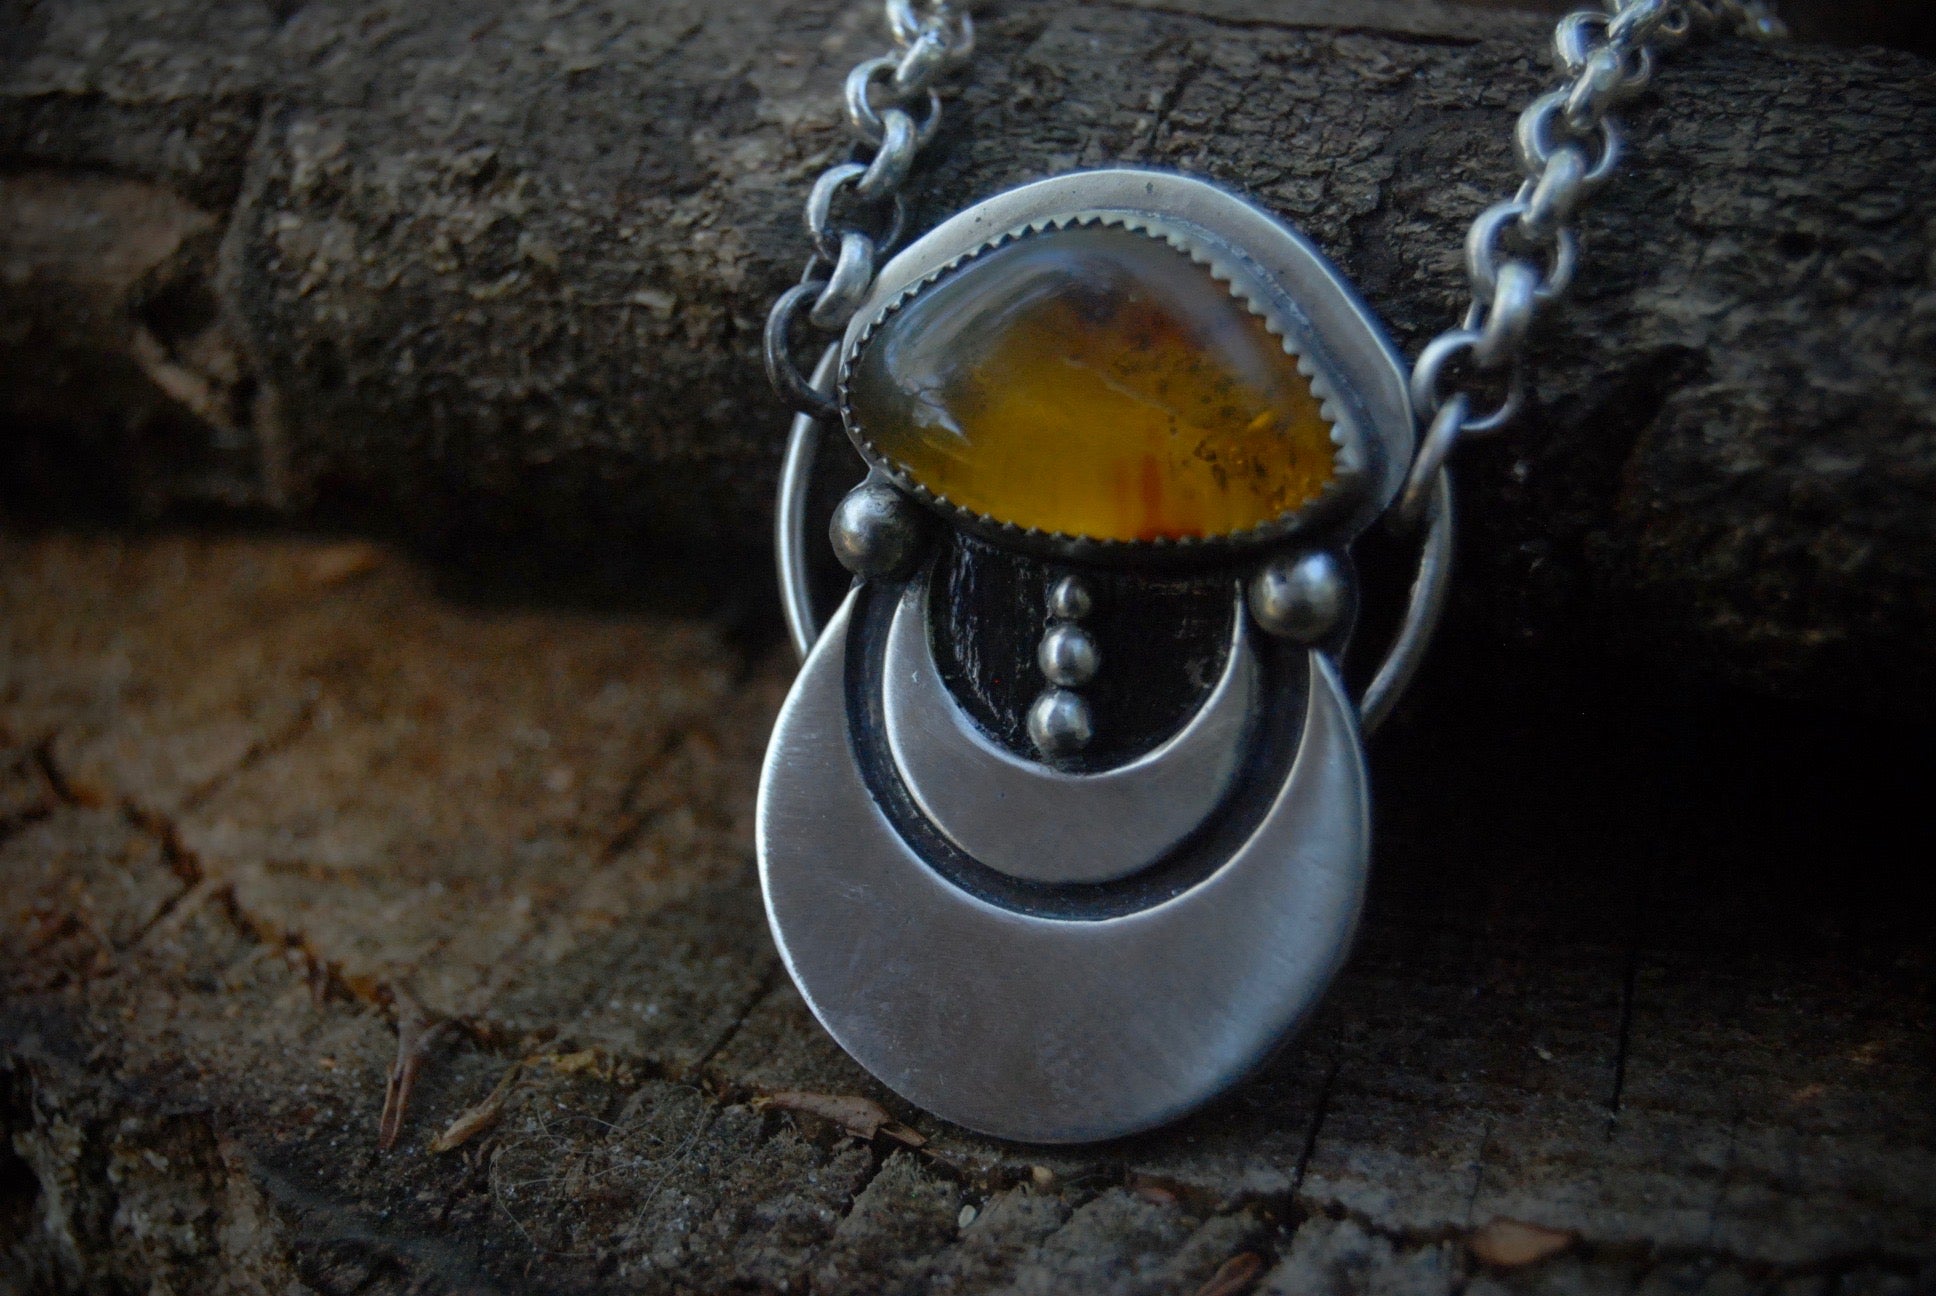 Amber moon necklace